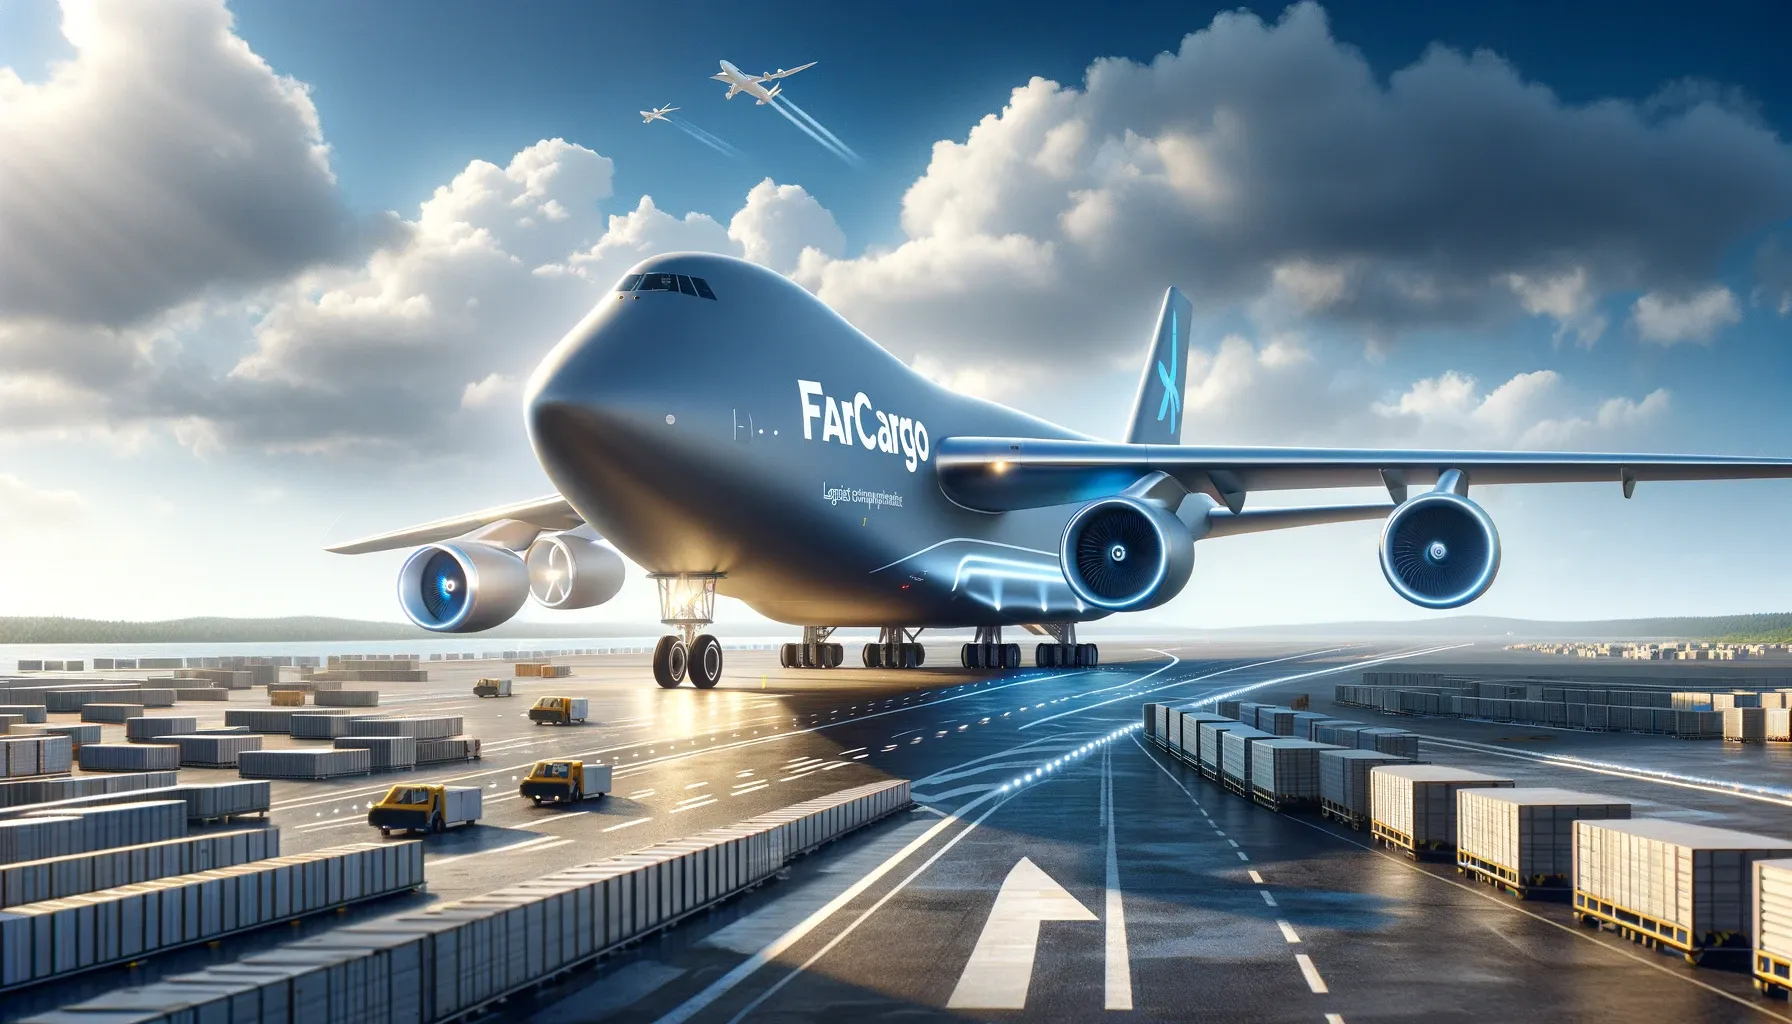 FarCargo Takes Delivery of its First Aircraft, Launching a New Era in Air Freight